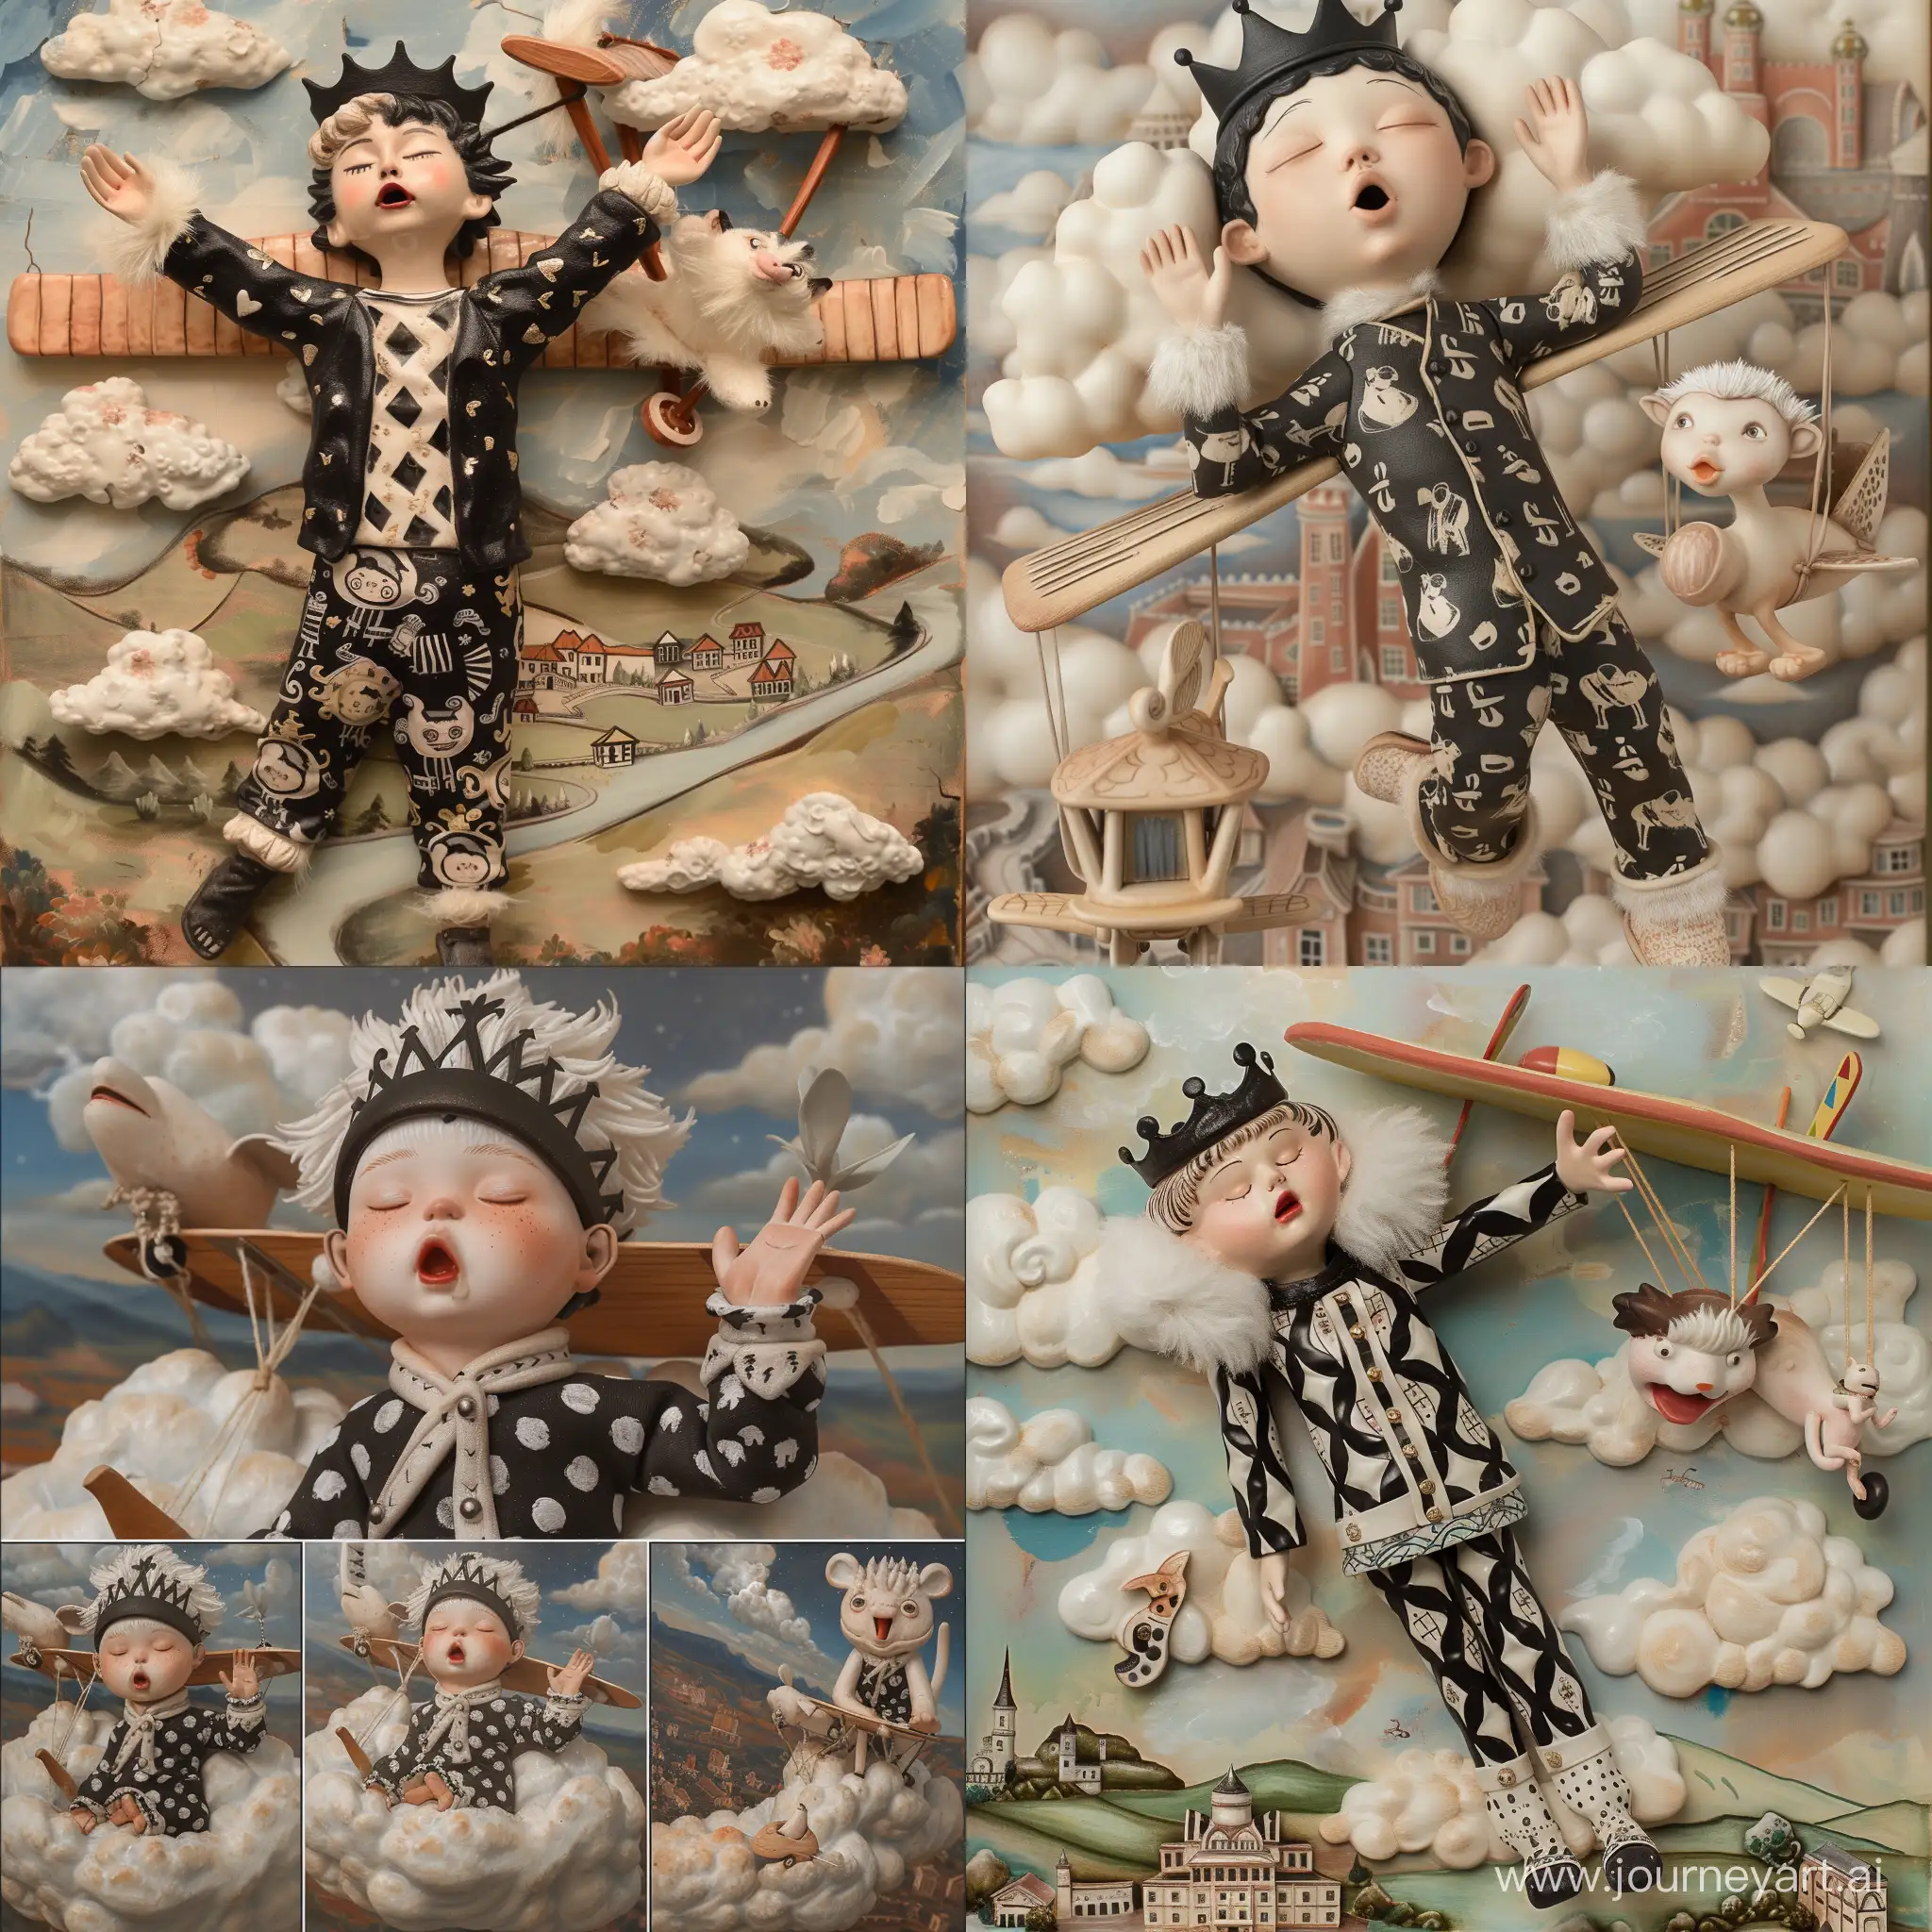 A ceramic art doll in the shape of a fairy tale.. In the story, a boy wears a prince's black and white patterned clothes, with pajamas outside his clothes, and a Po Feng (((Po Feng has white furry hair on the edge))) hanging on his shoulders. He wears a black crown. Suffering from sleepwalking. He closed his eyes, stretched out his hands, and walked aimlessly on the clouds. He could see classical towns in mid-air, and his style was inspired by Laurel Burch and Eric Carle. A lovely Suricata suricatta follows the prince in a classic and simple wooden plane, with his mouth open in a surprised expression, and the painting shows multiple perspectives of the scene. 8K, real